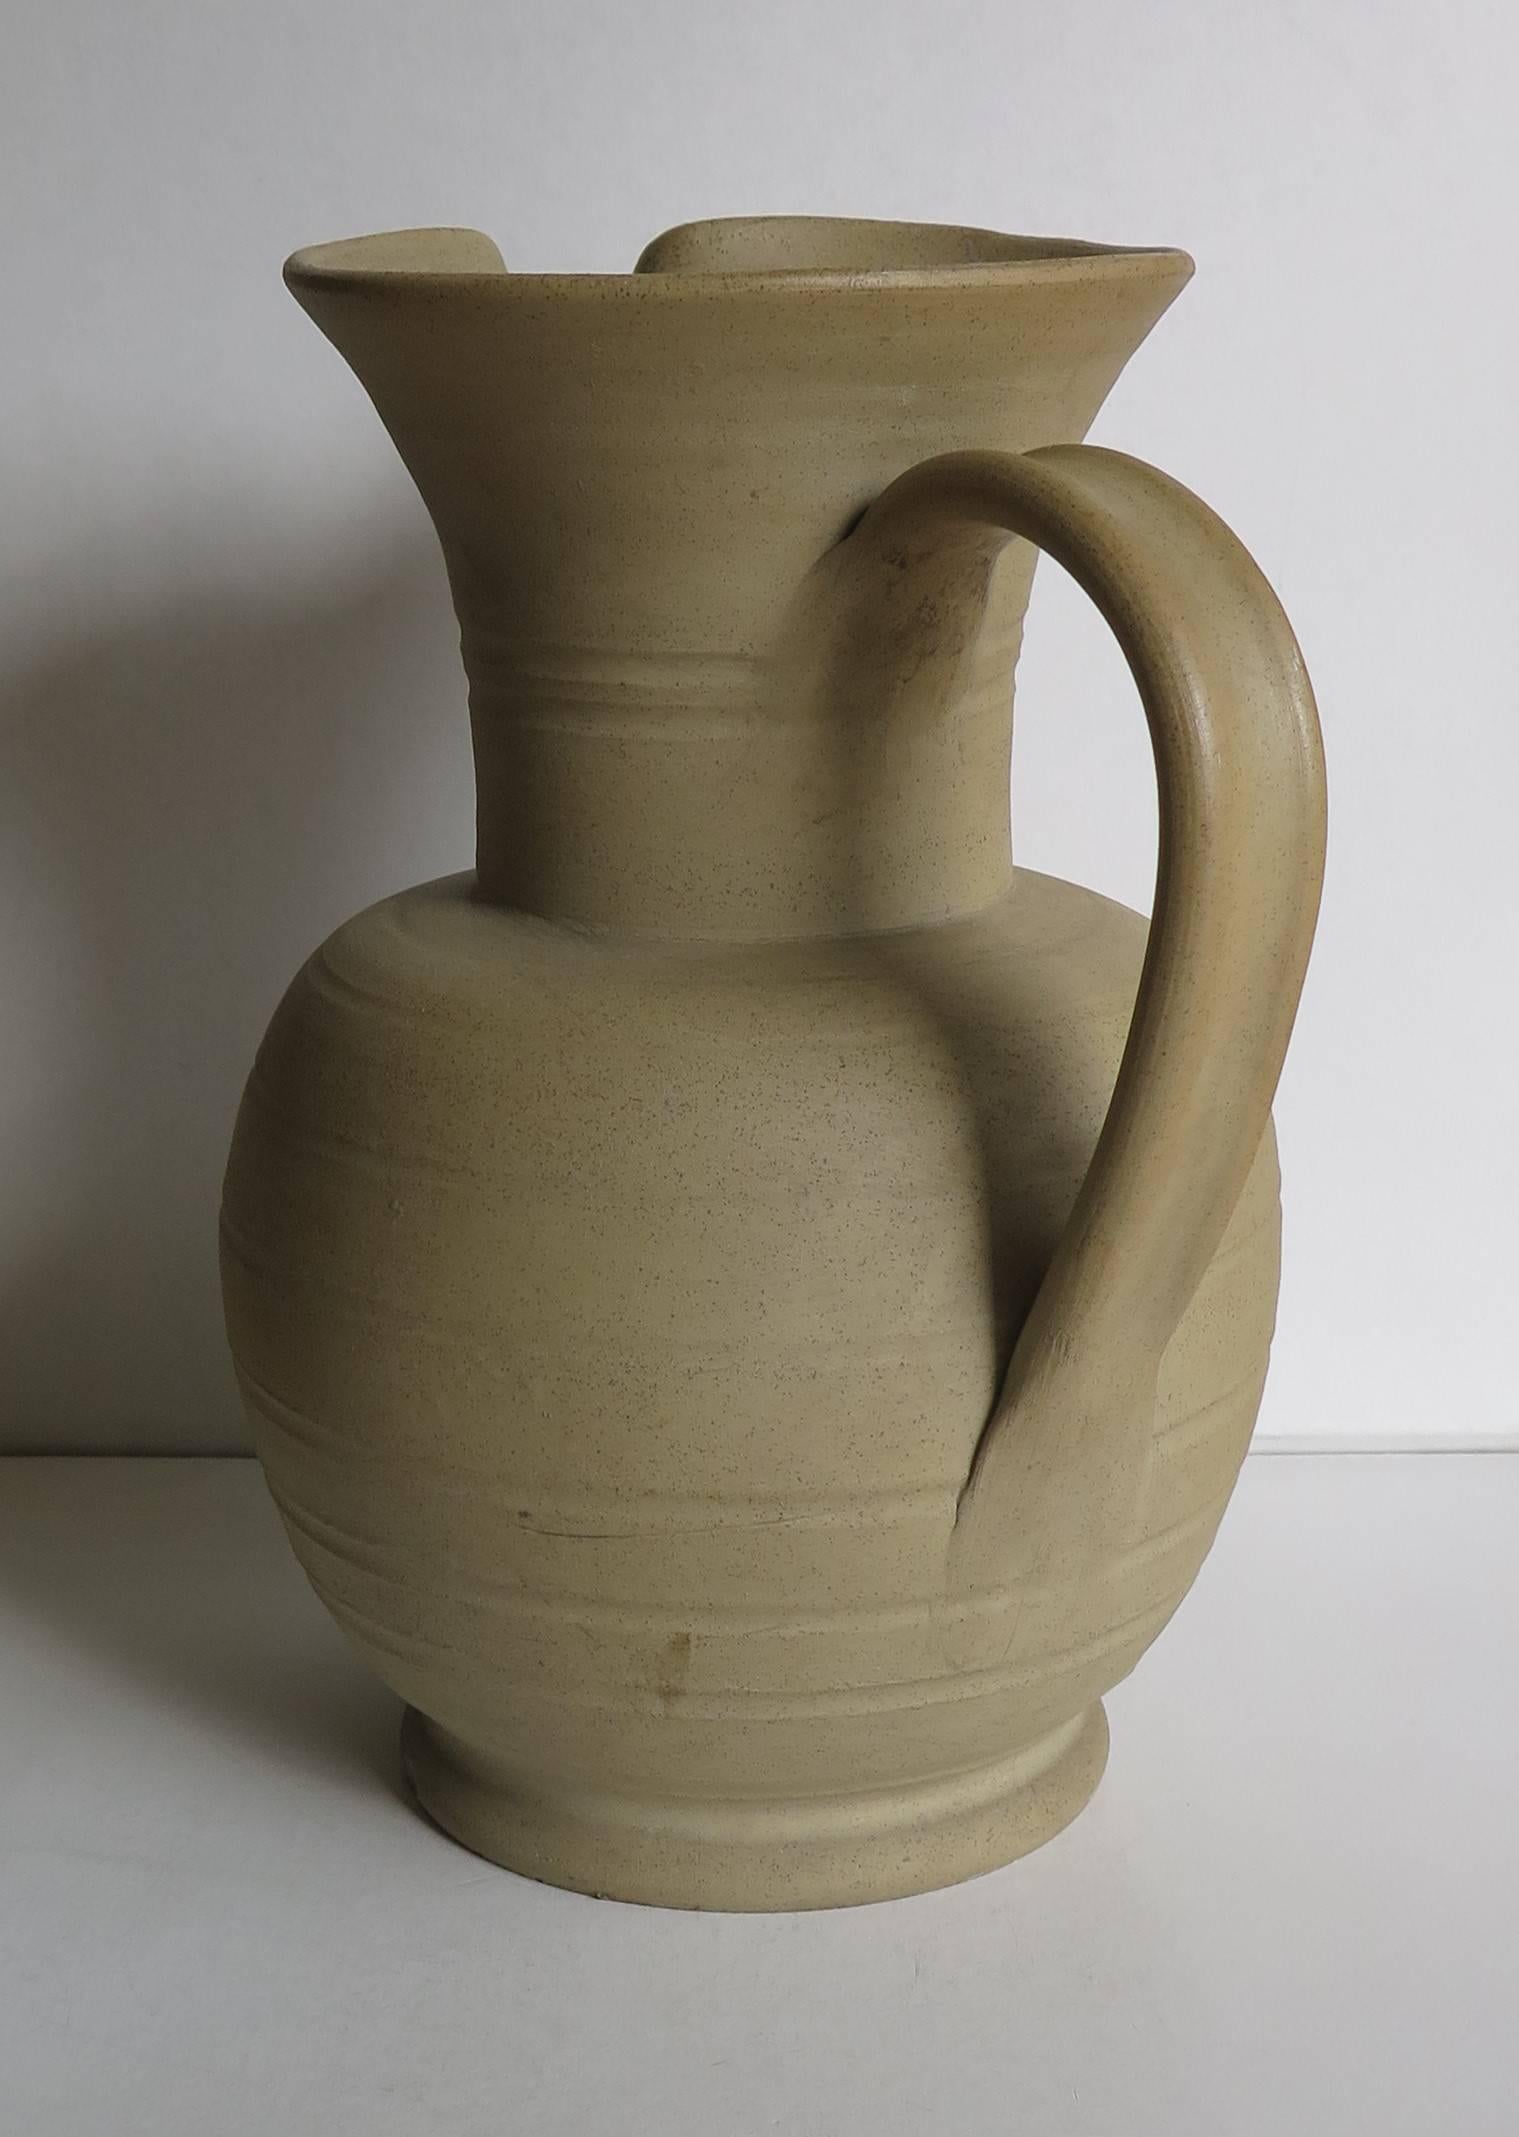 Rustic Large Moira Pottery Hillstonia Stoneware Jug or Pitcher, Hand potted Circa 1940